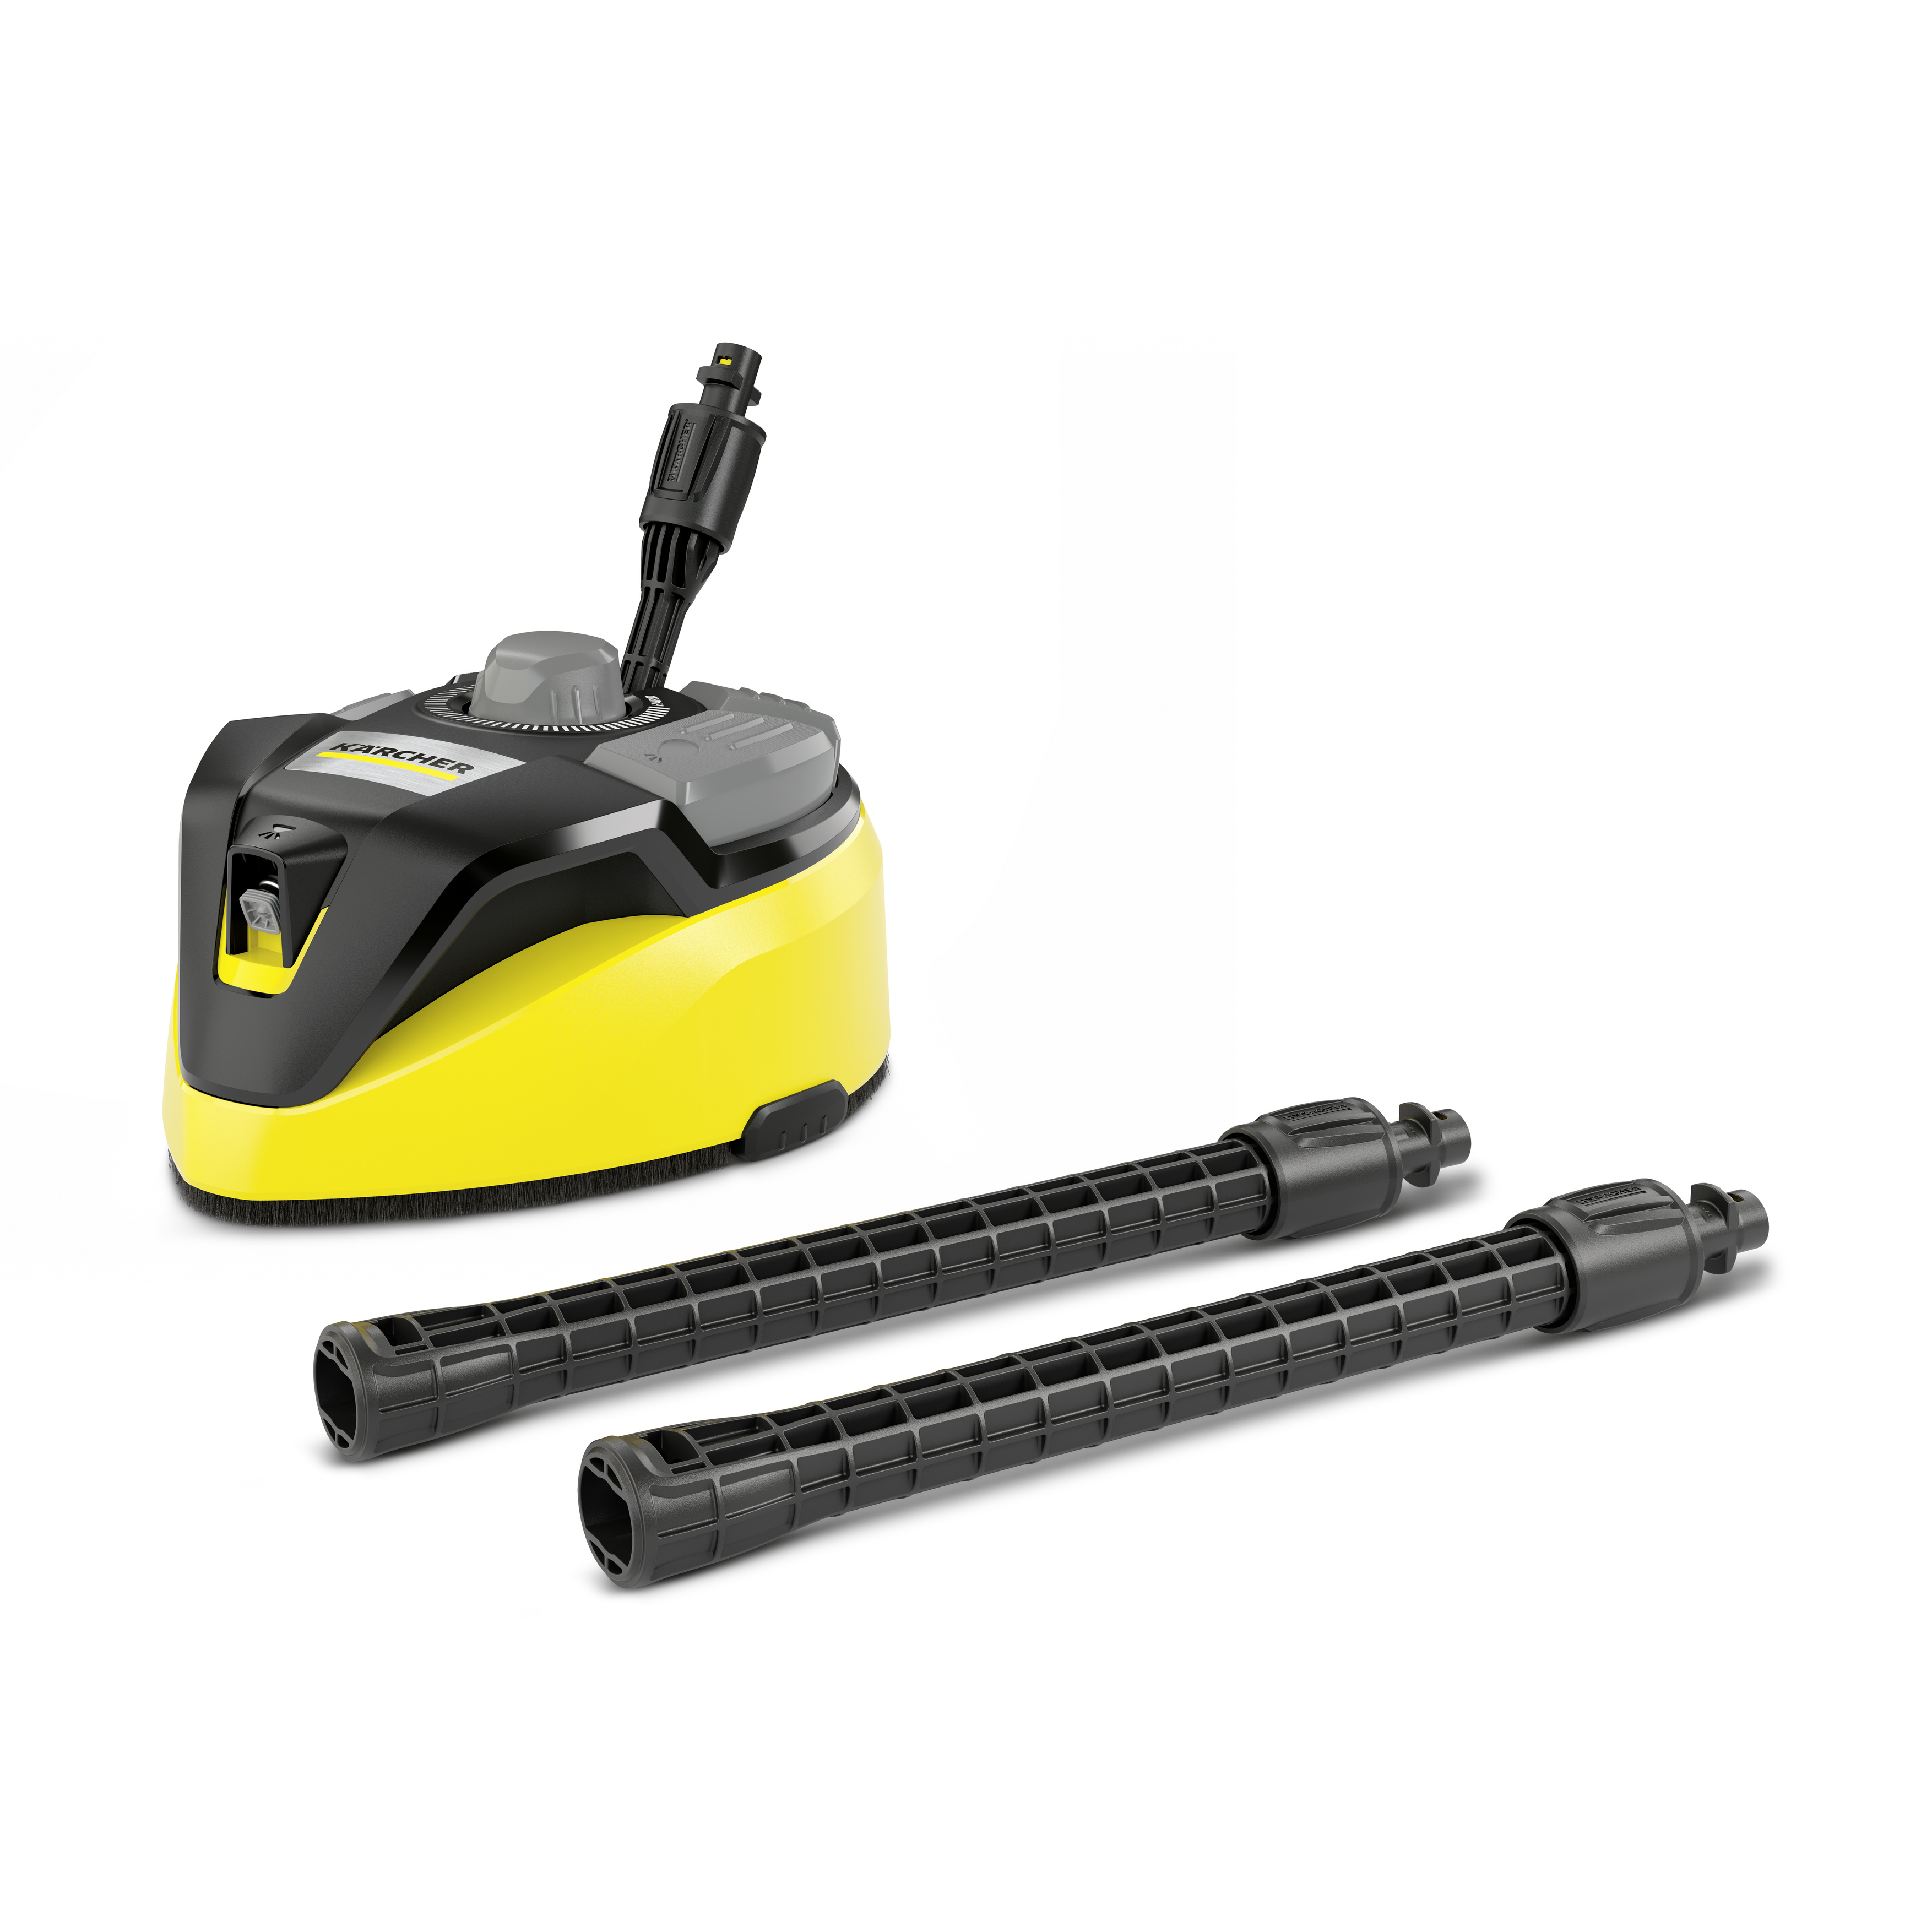 T 7 Plus T-Racer surface cleaner - 1